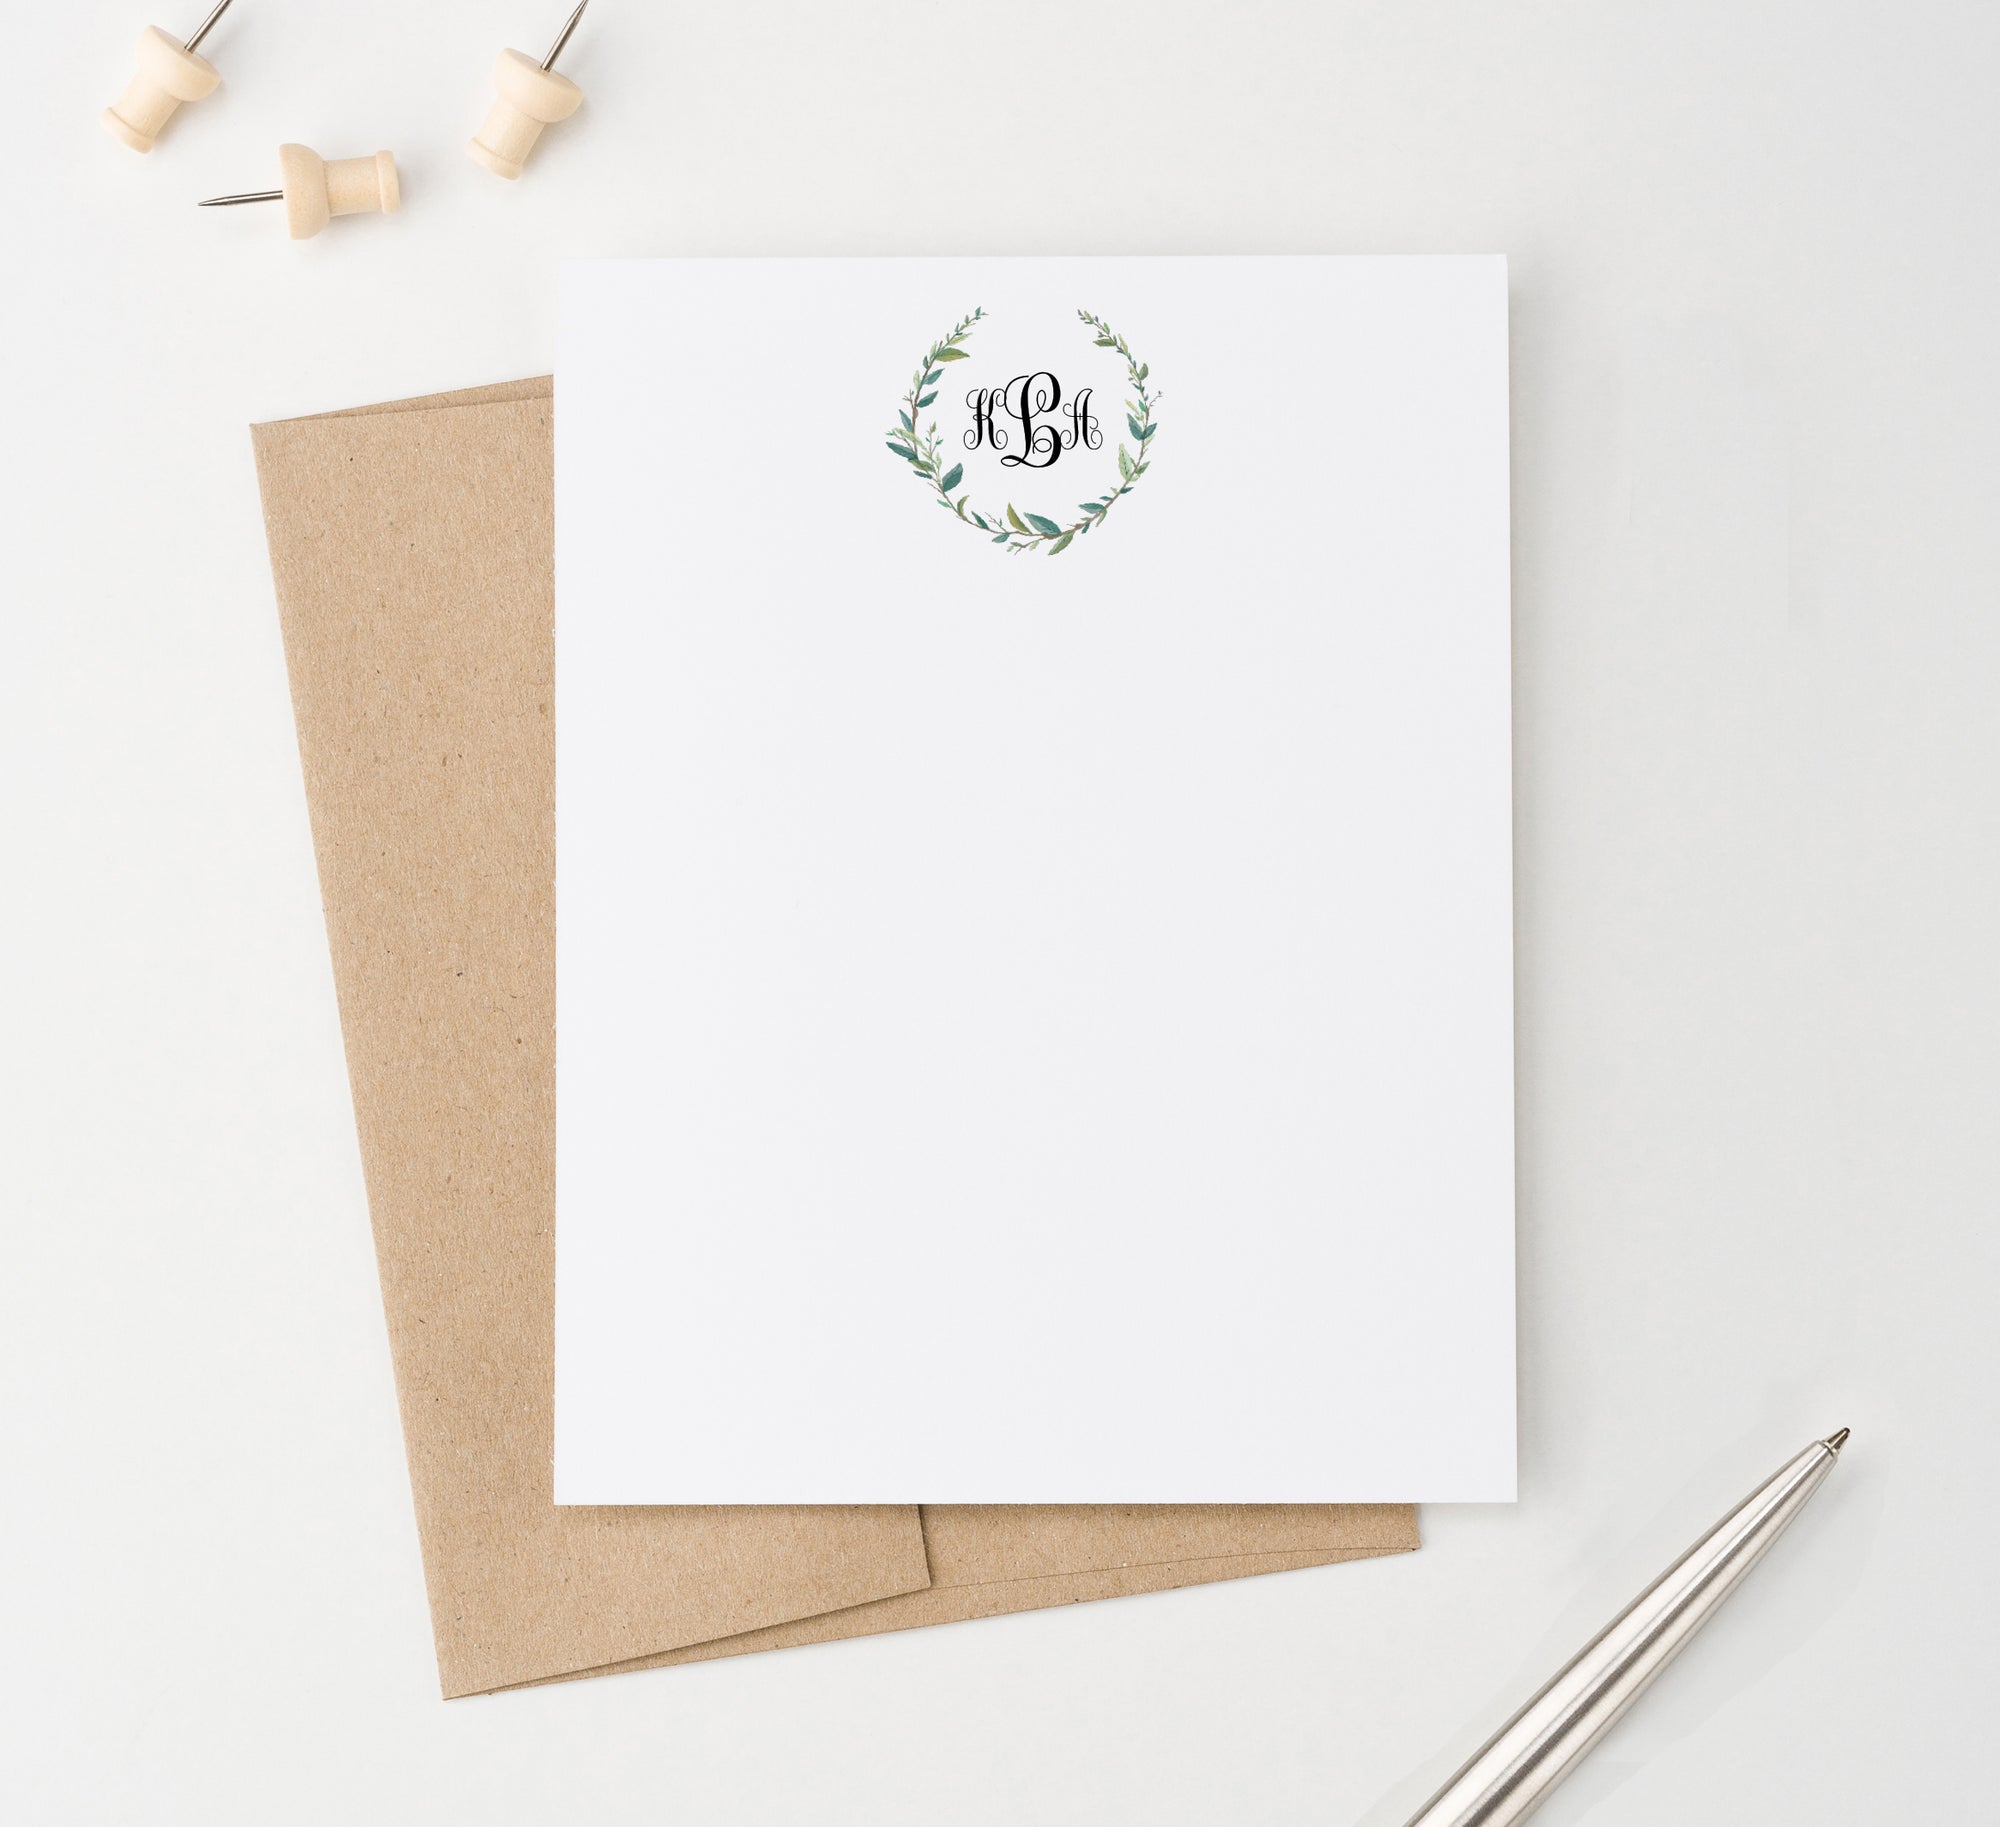 Watercolor Greenery Monogrammed Note Cards With Wreath